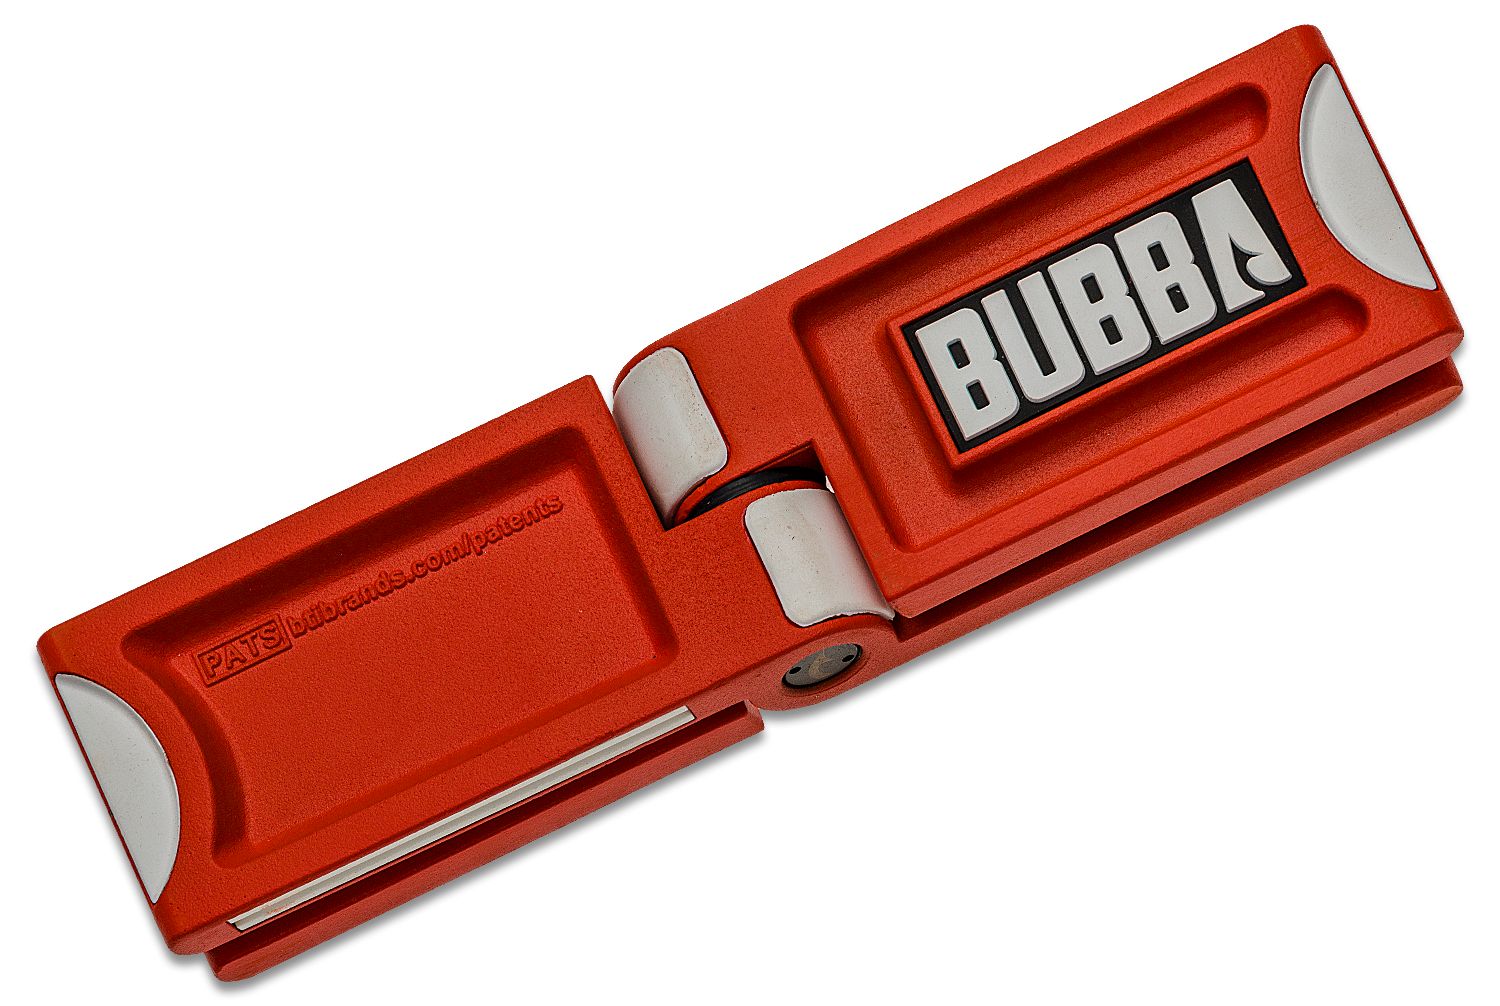 BUBBA Ultra Knife Sharpener with Non-Slip Grip Base and Sharpener Sheath  for Manual Knife Sharpening for Any Blade